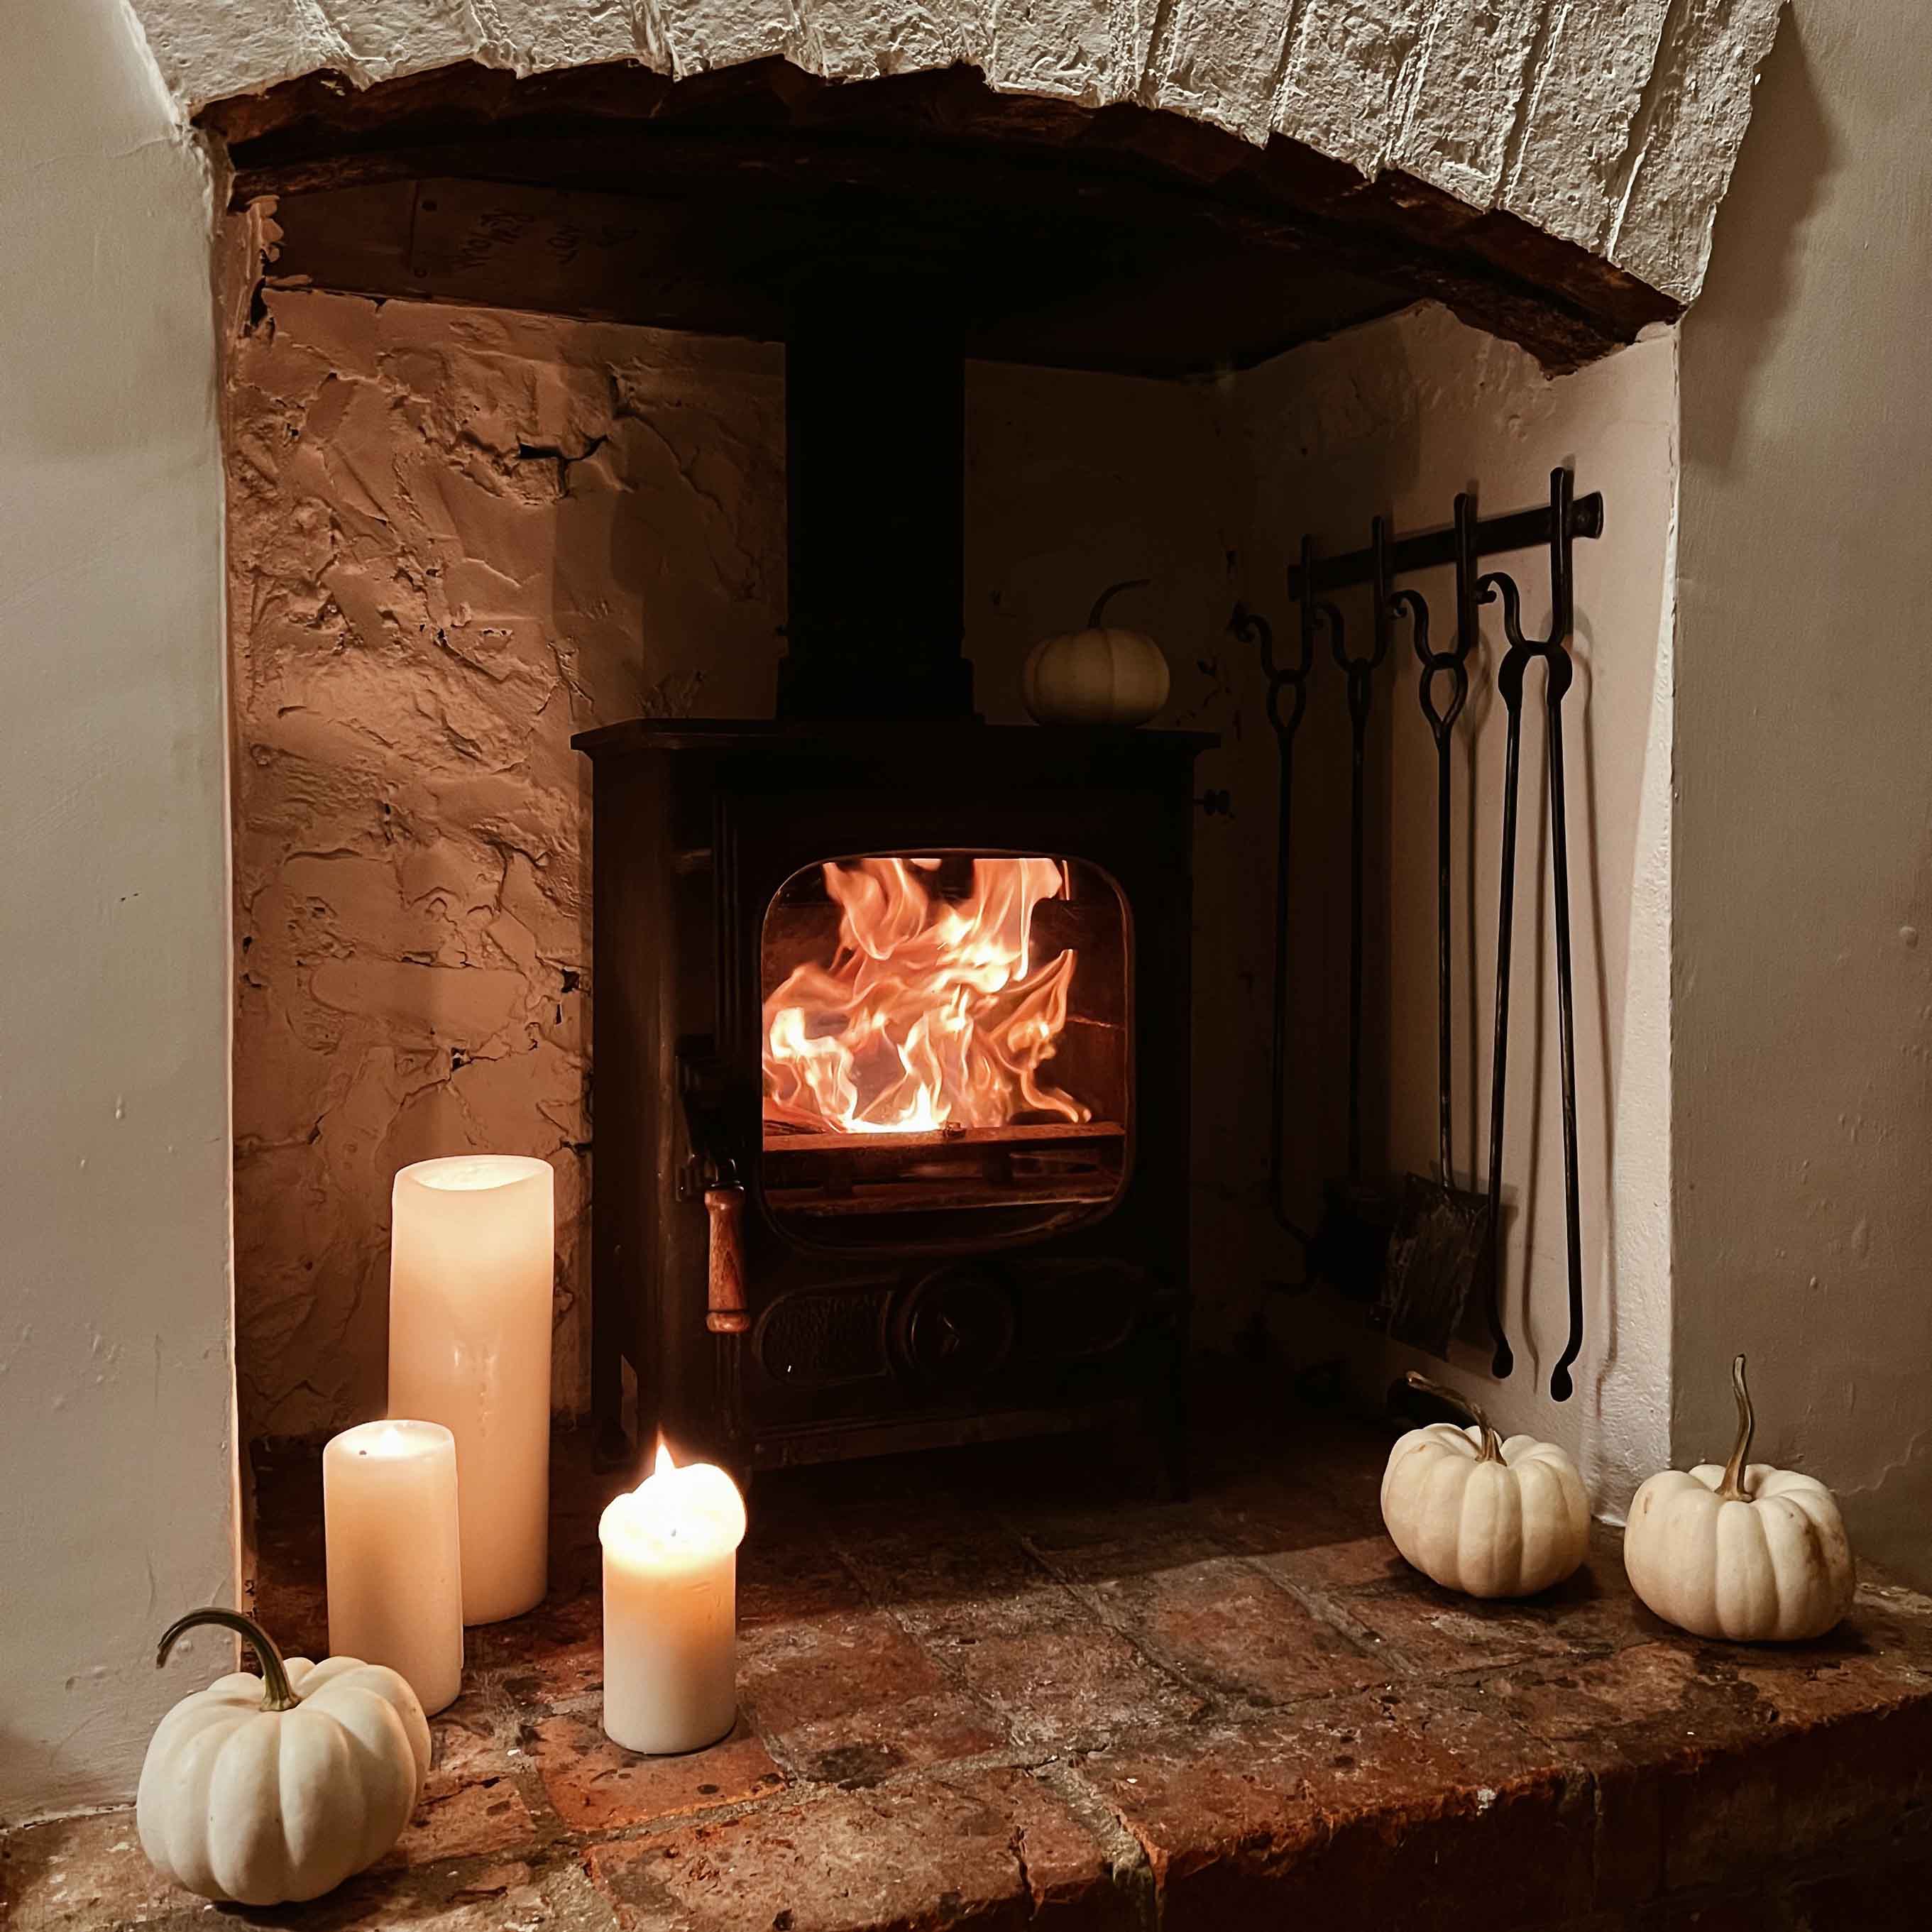 Fireside moments at Bramble Cottage